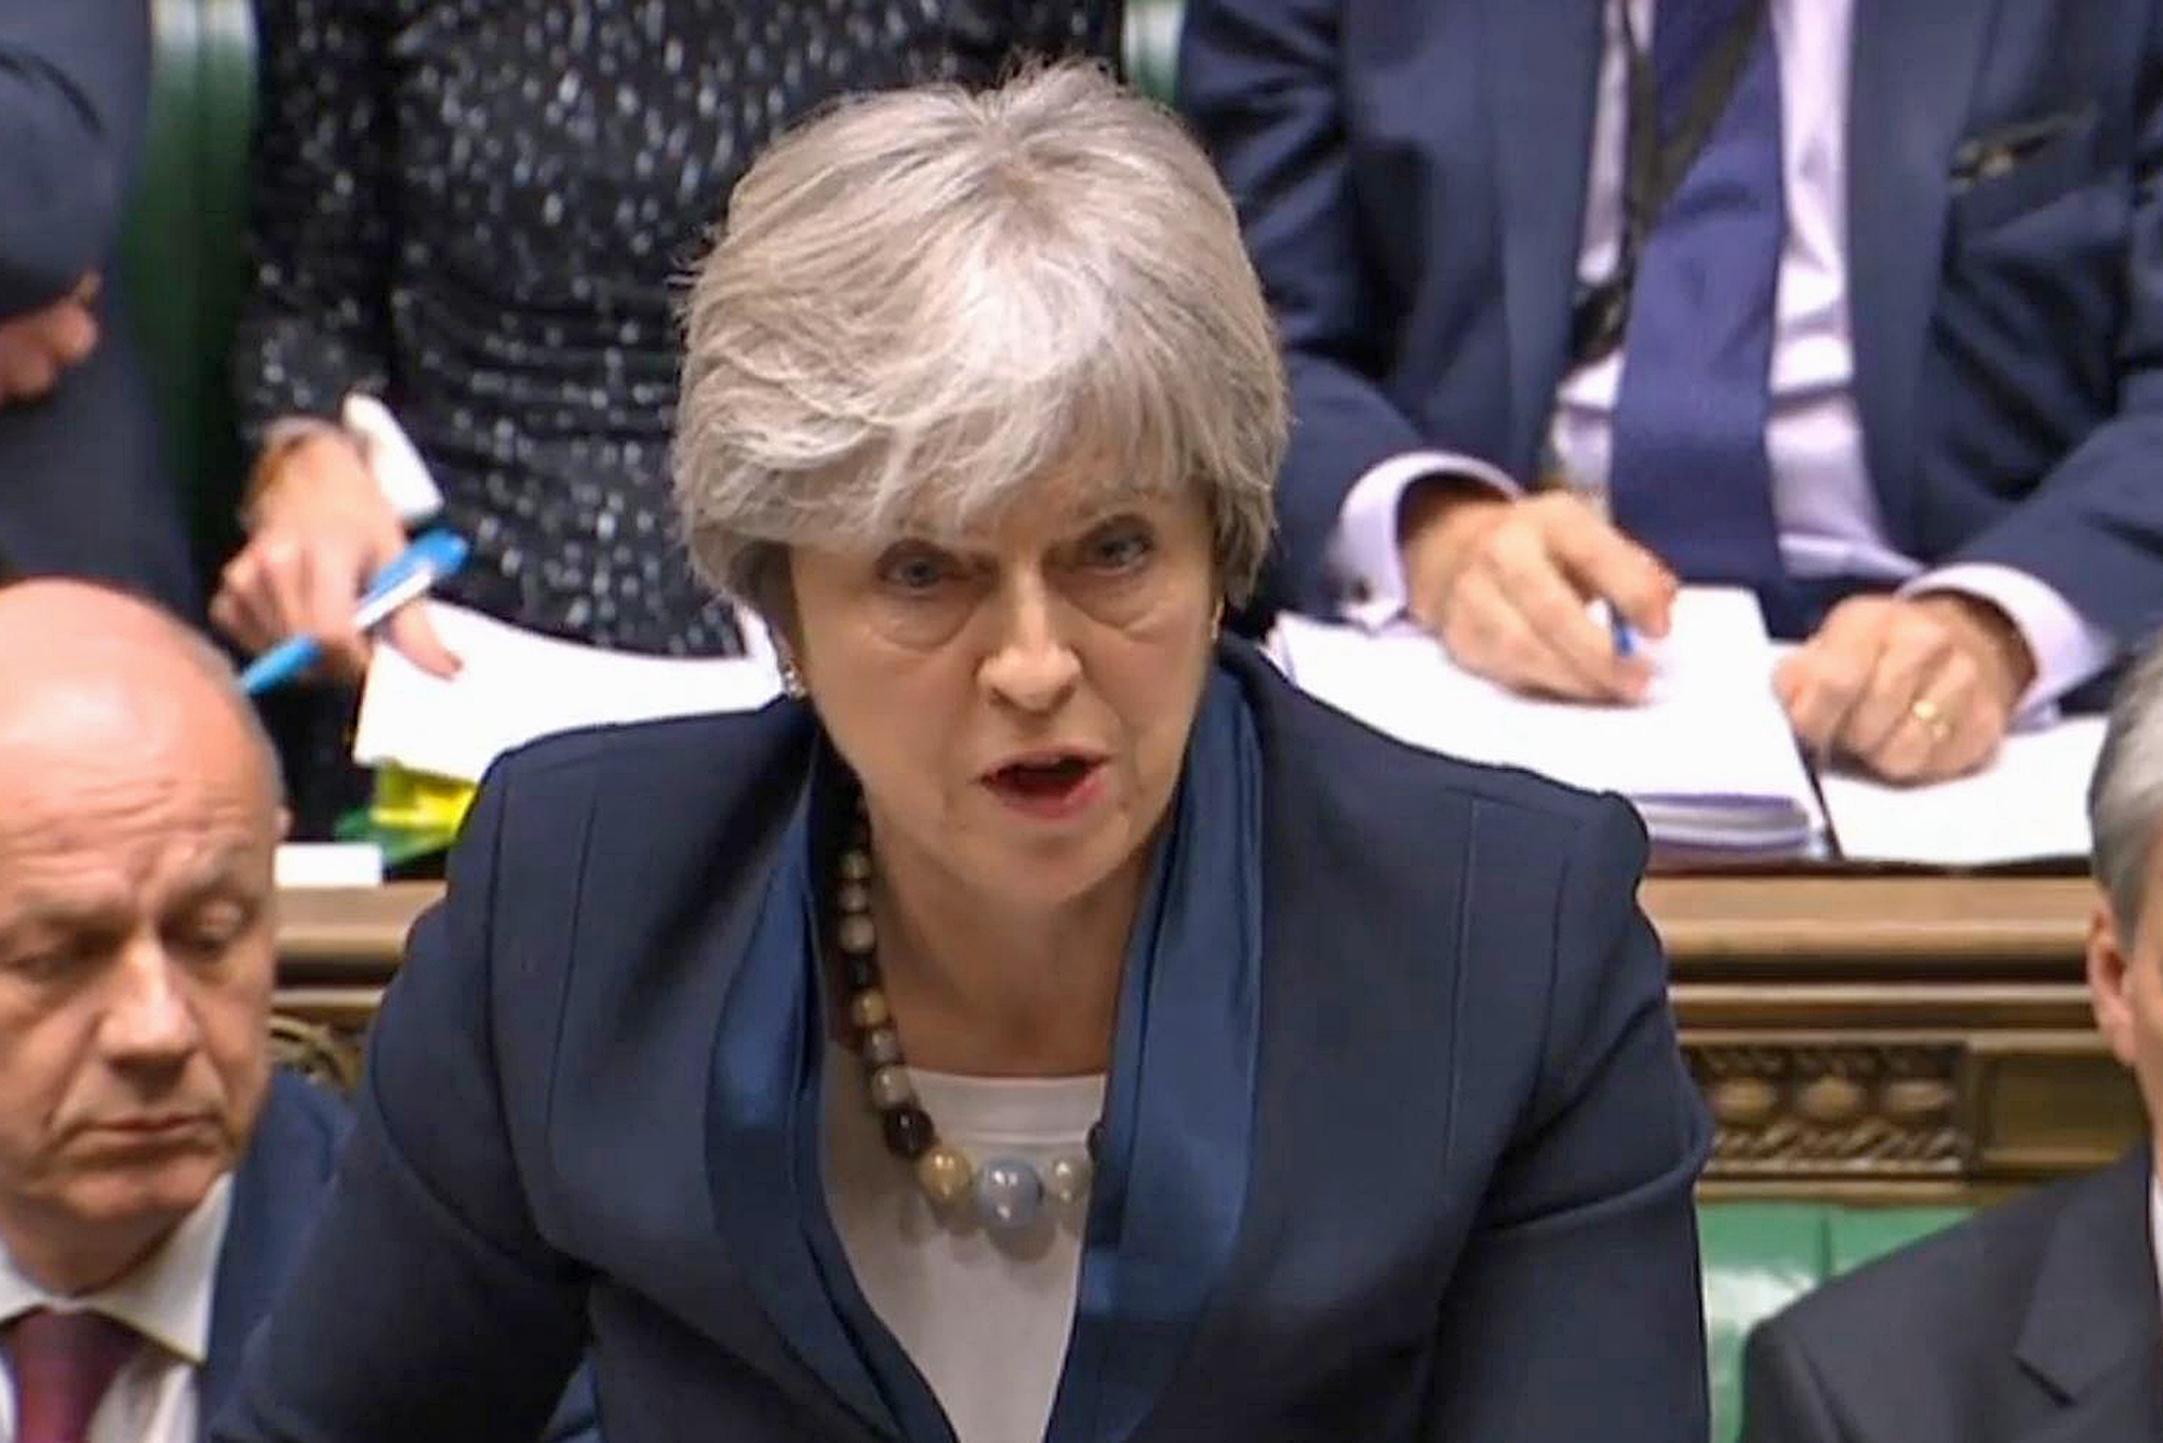 Theresa May was accused using statistics misleadingly during Prime Minister's Questions